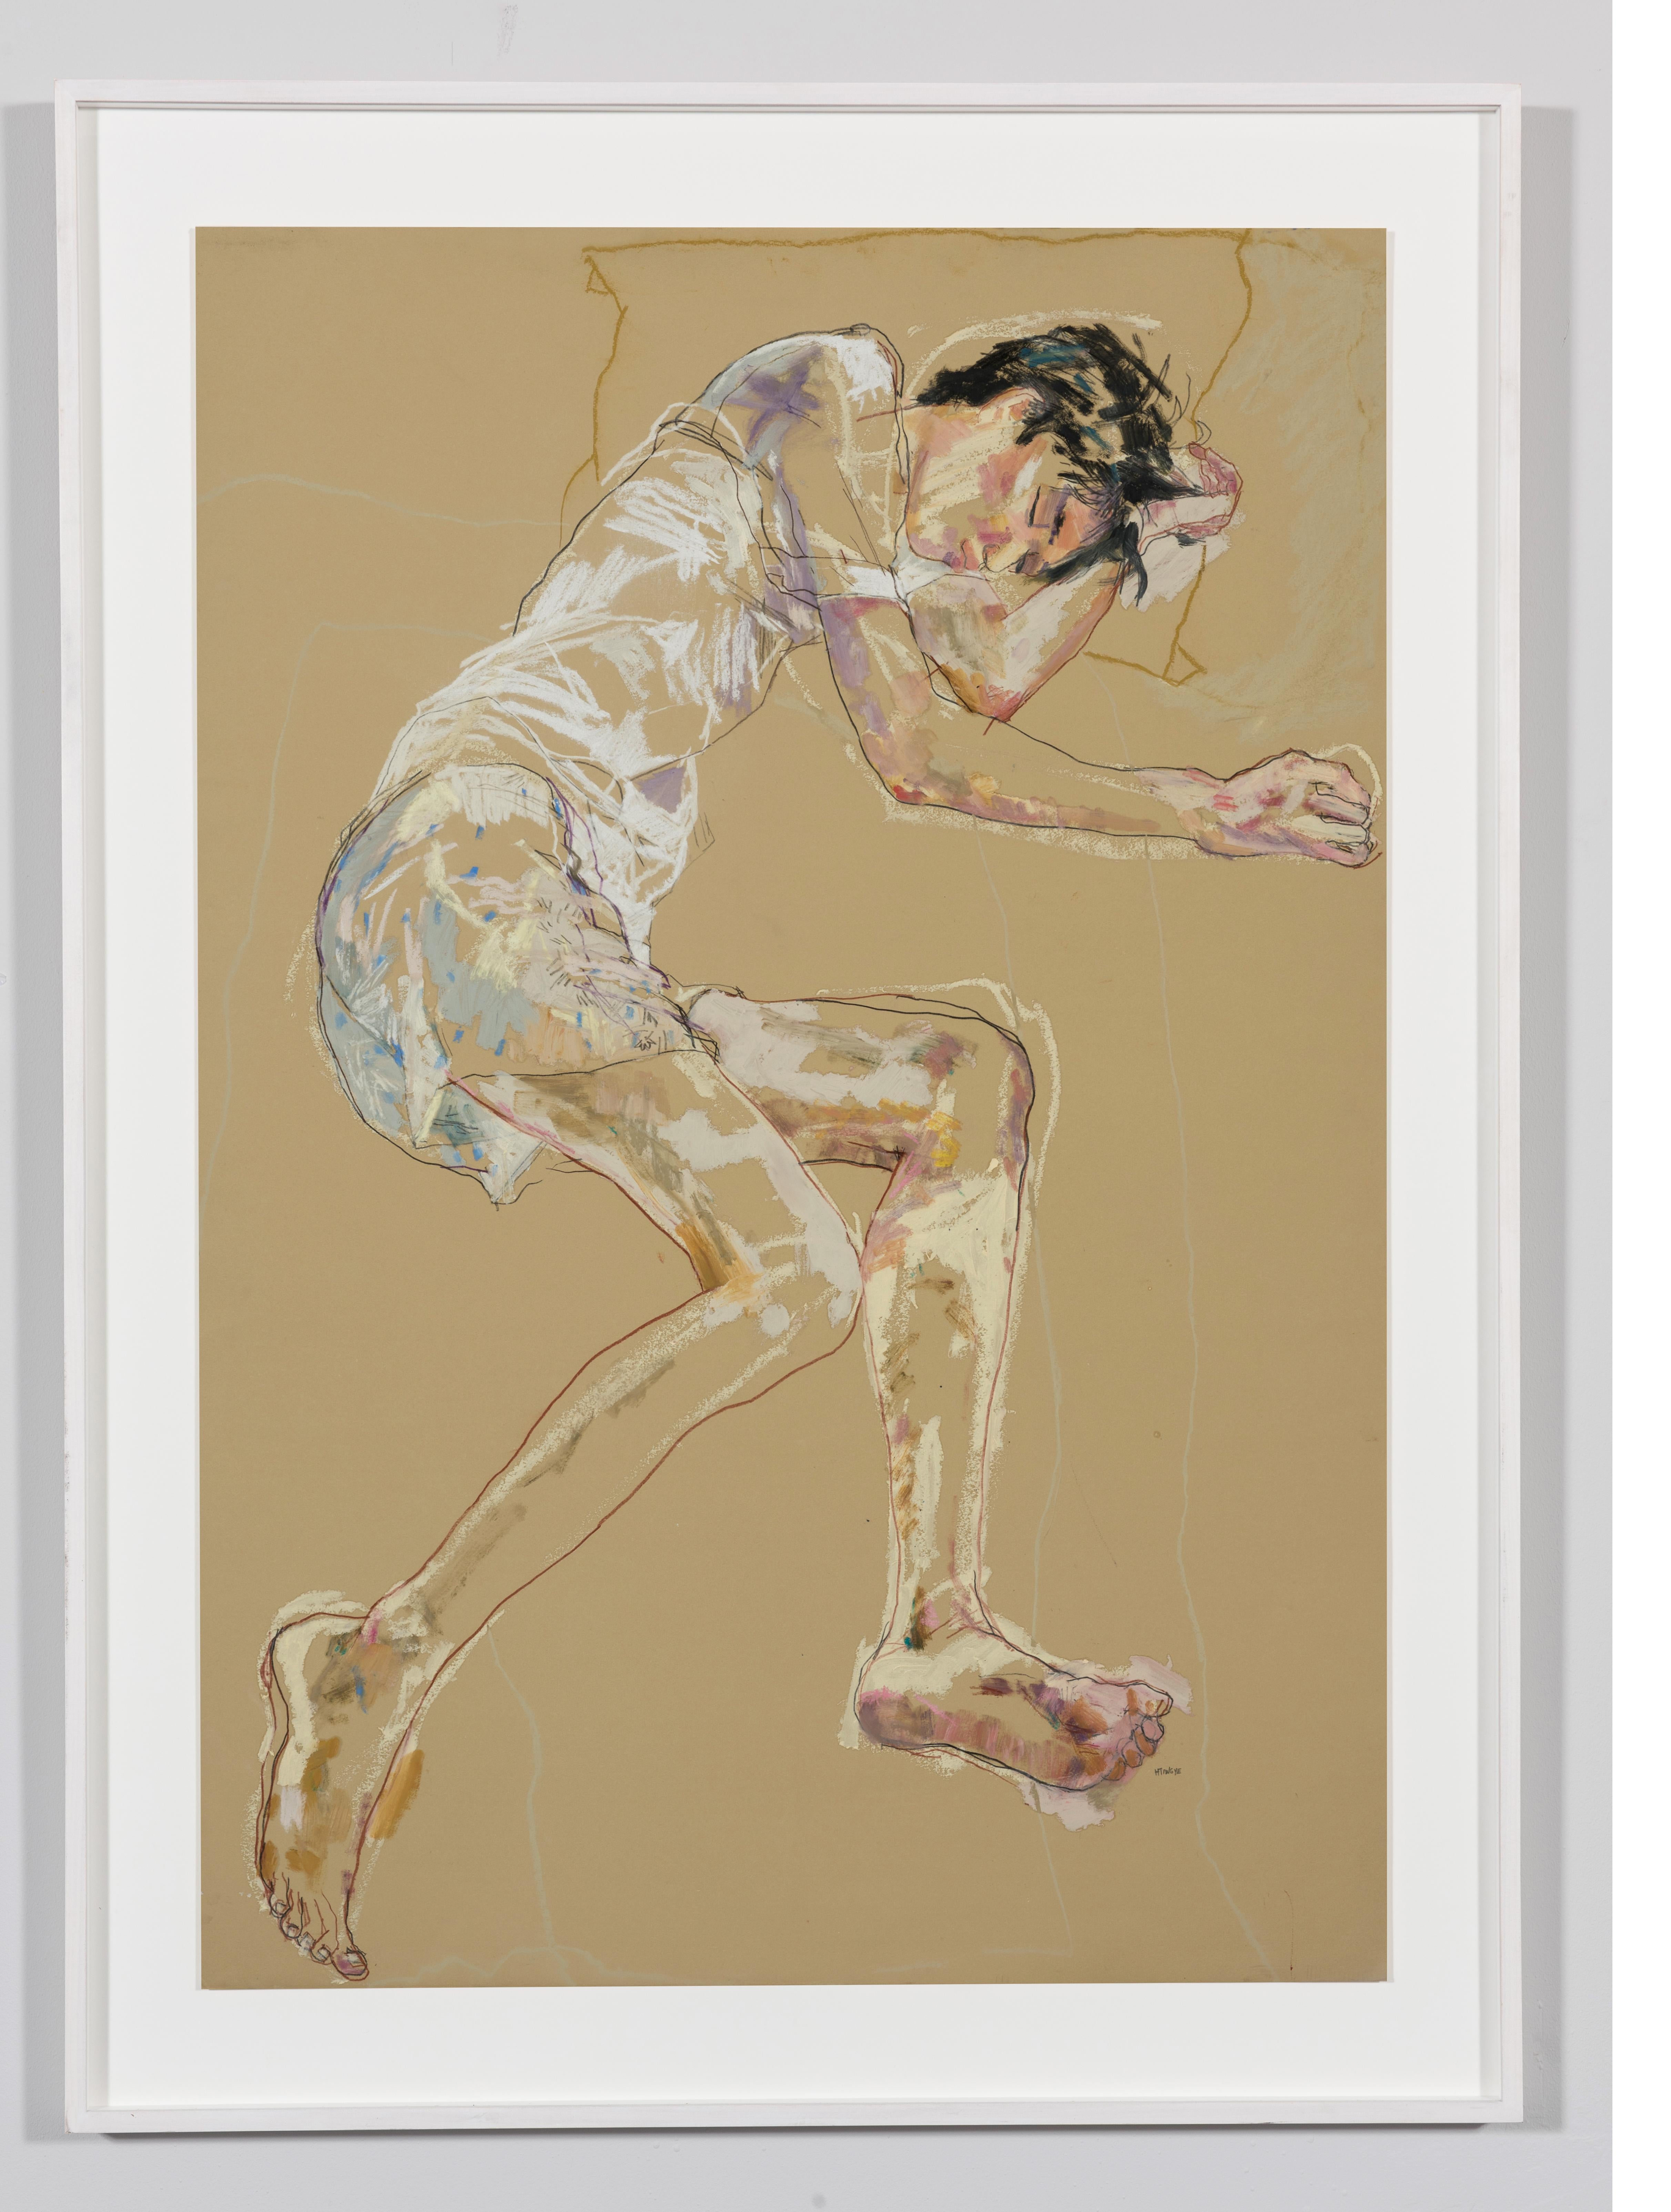 Nobu (Lying Down, on side), Mixed media on Rives paper - Painting by Howard Tangye